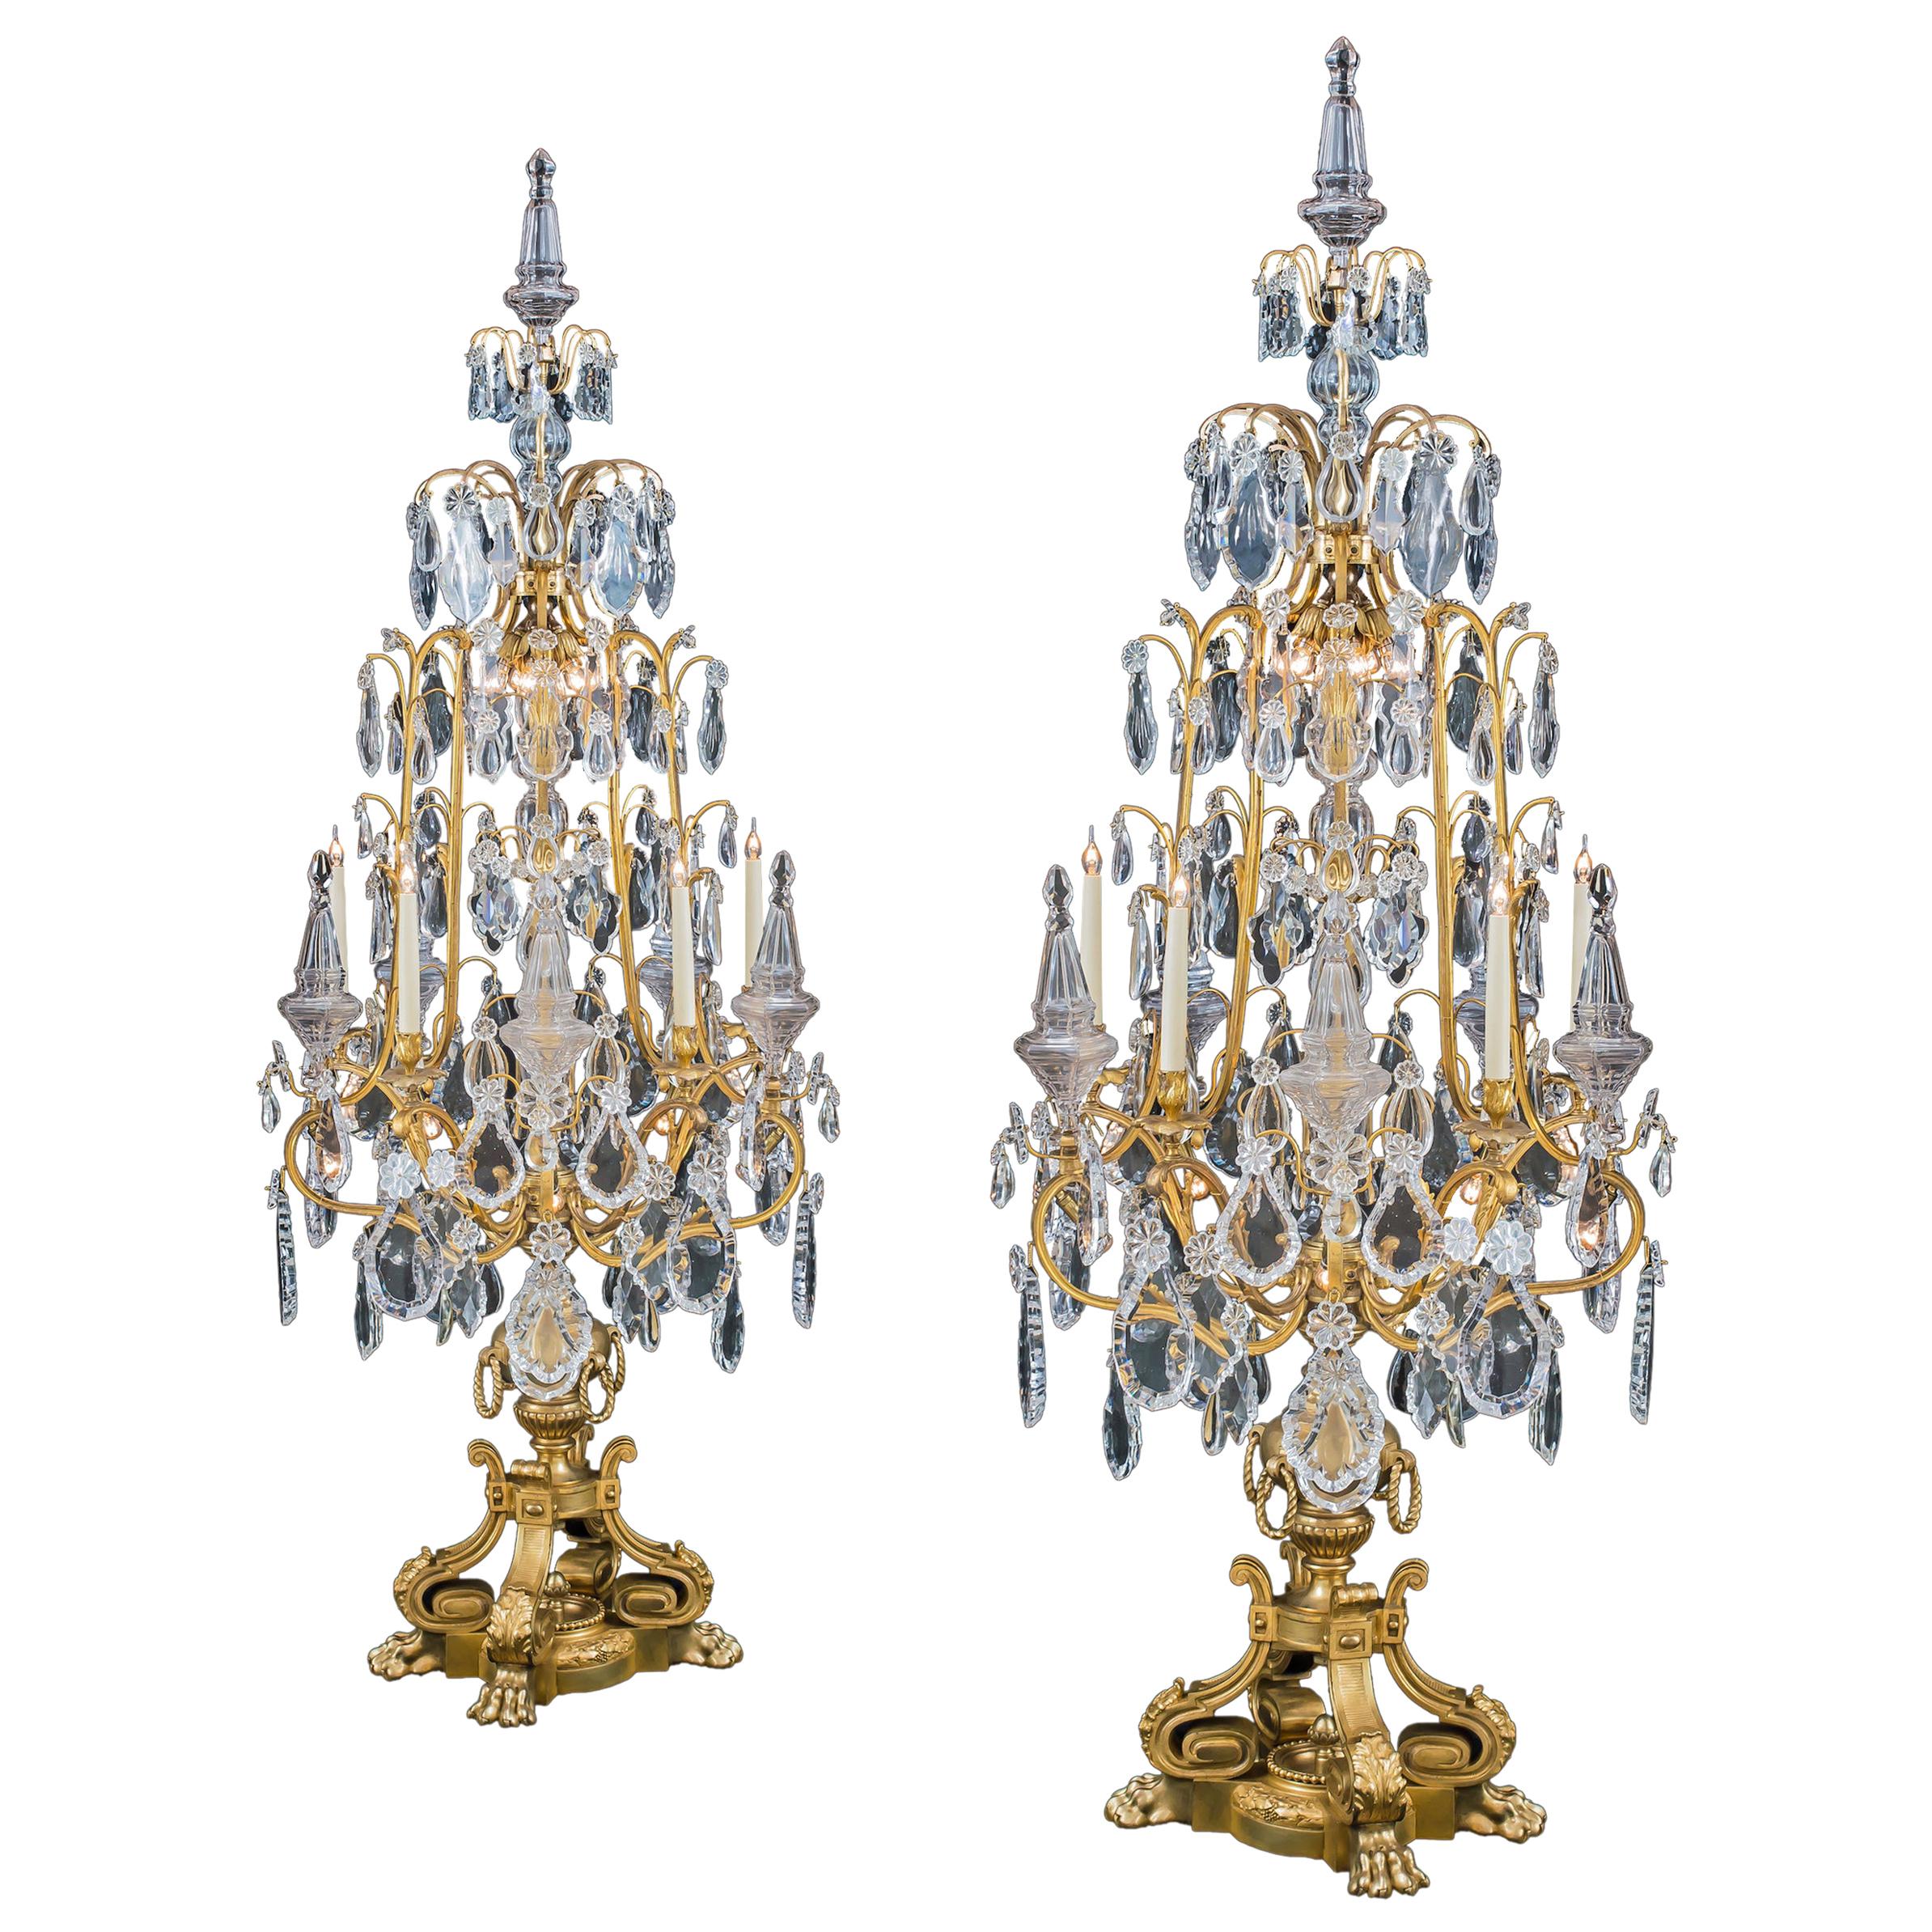 Monumental Pair of Louis XV Style Ormolu and Crystal Girandoles by Baccarat